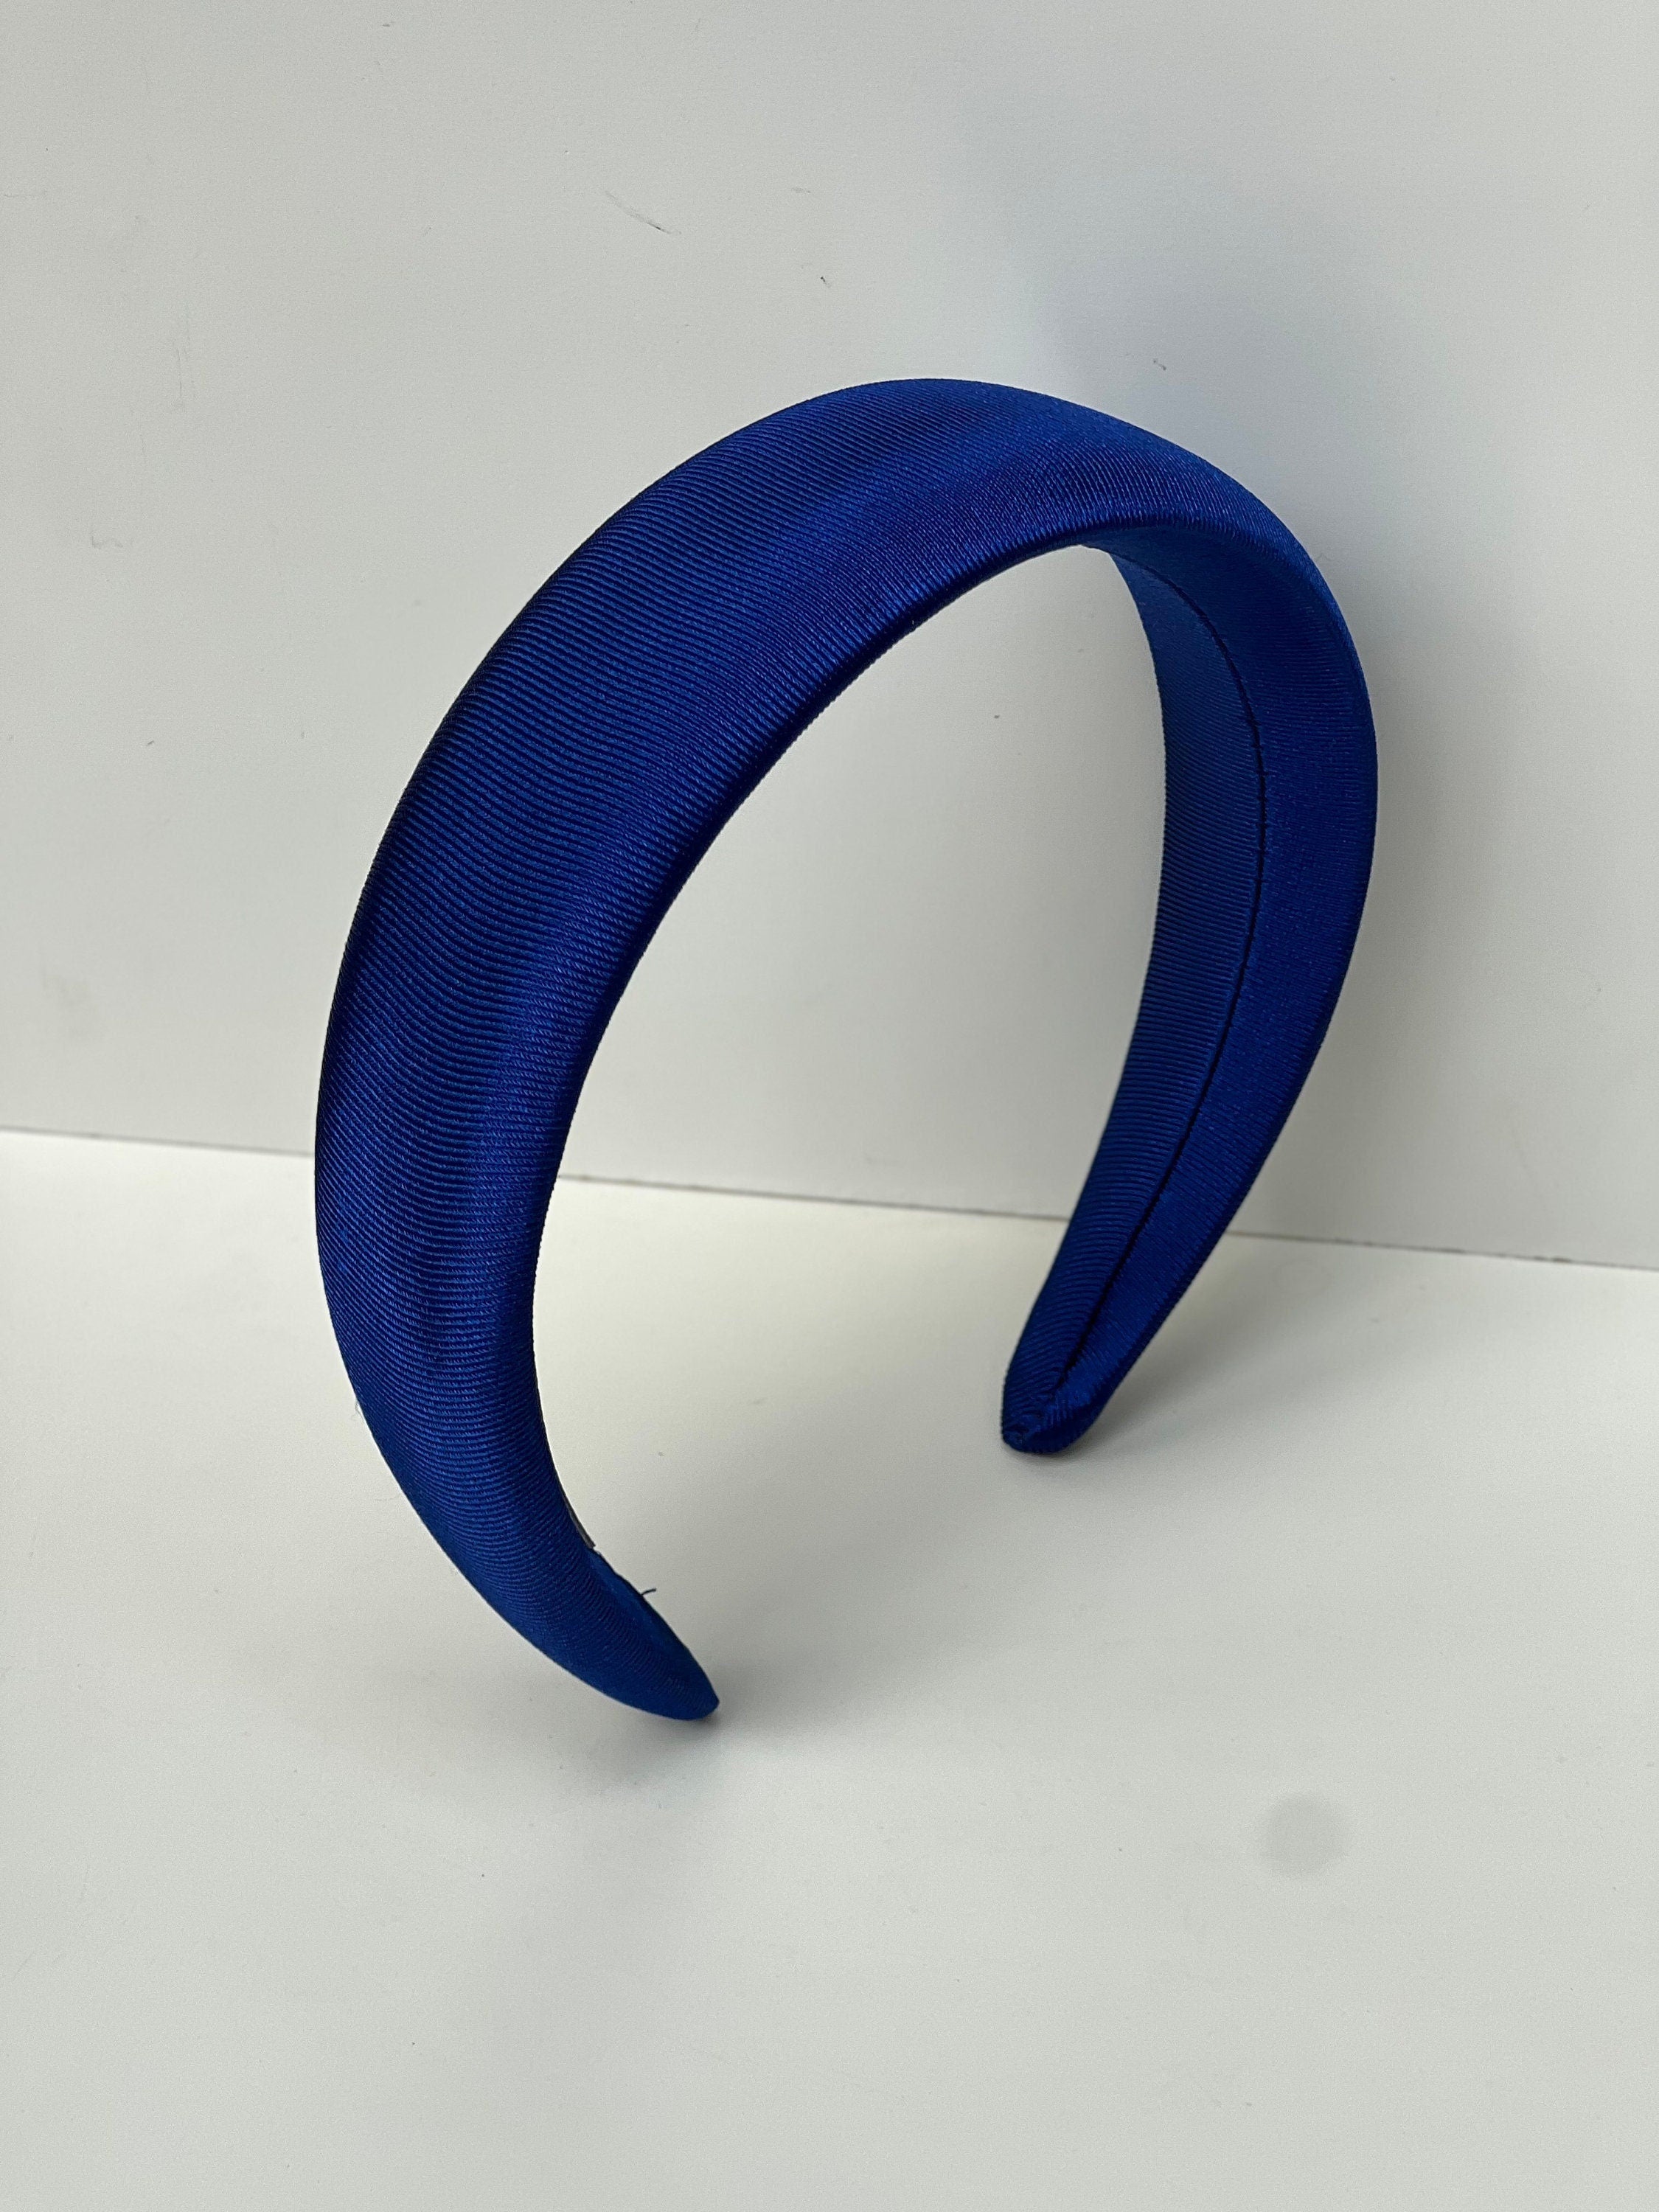 Make a statement with this bright blue satin headband, perfect for adding a pop of color to any hairstyle.